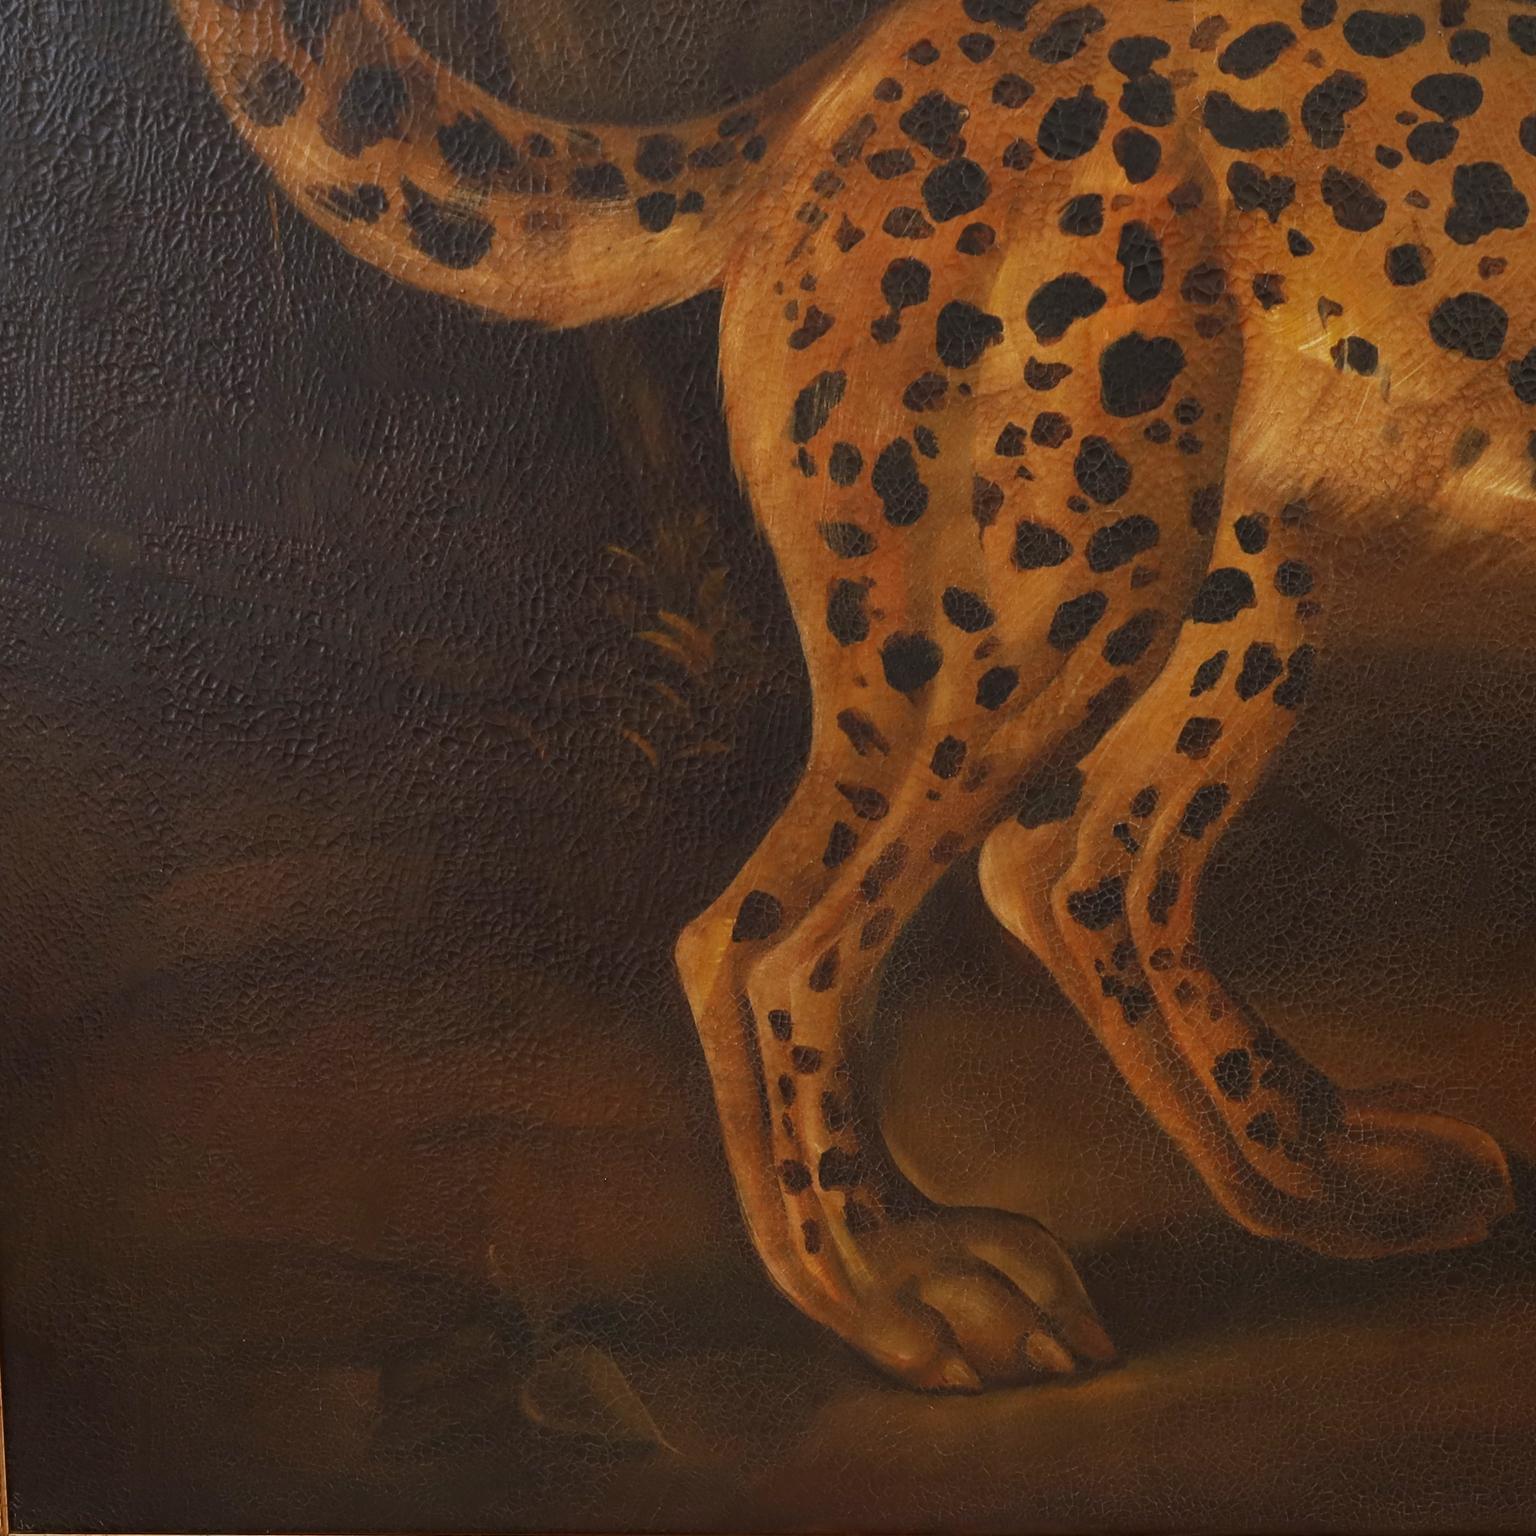 Reginald Baxter Vintage Oil Painting on Canvas of a Cheetah or Leopard 1